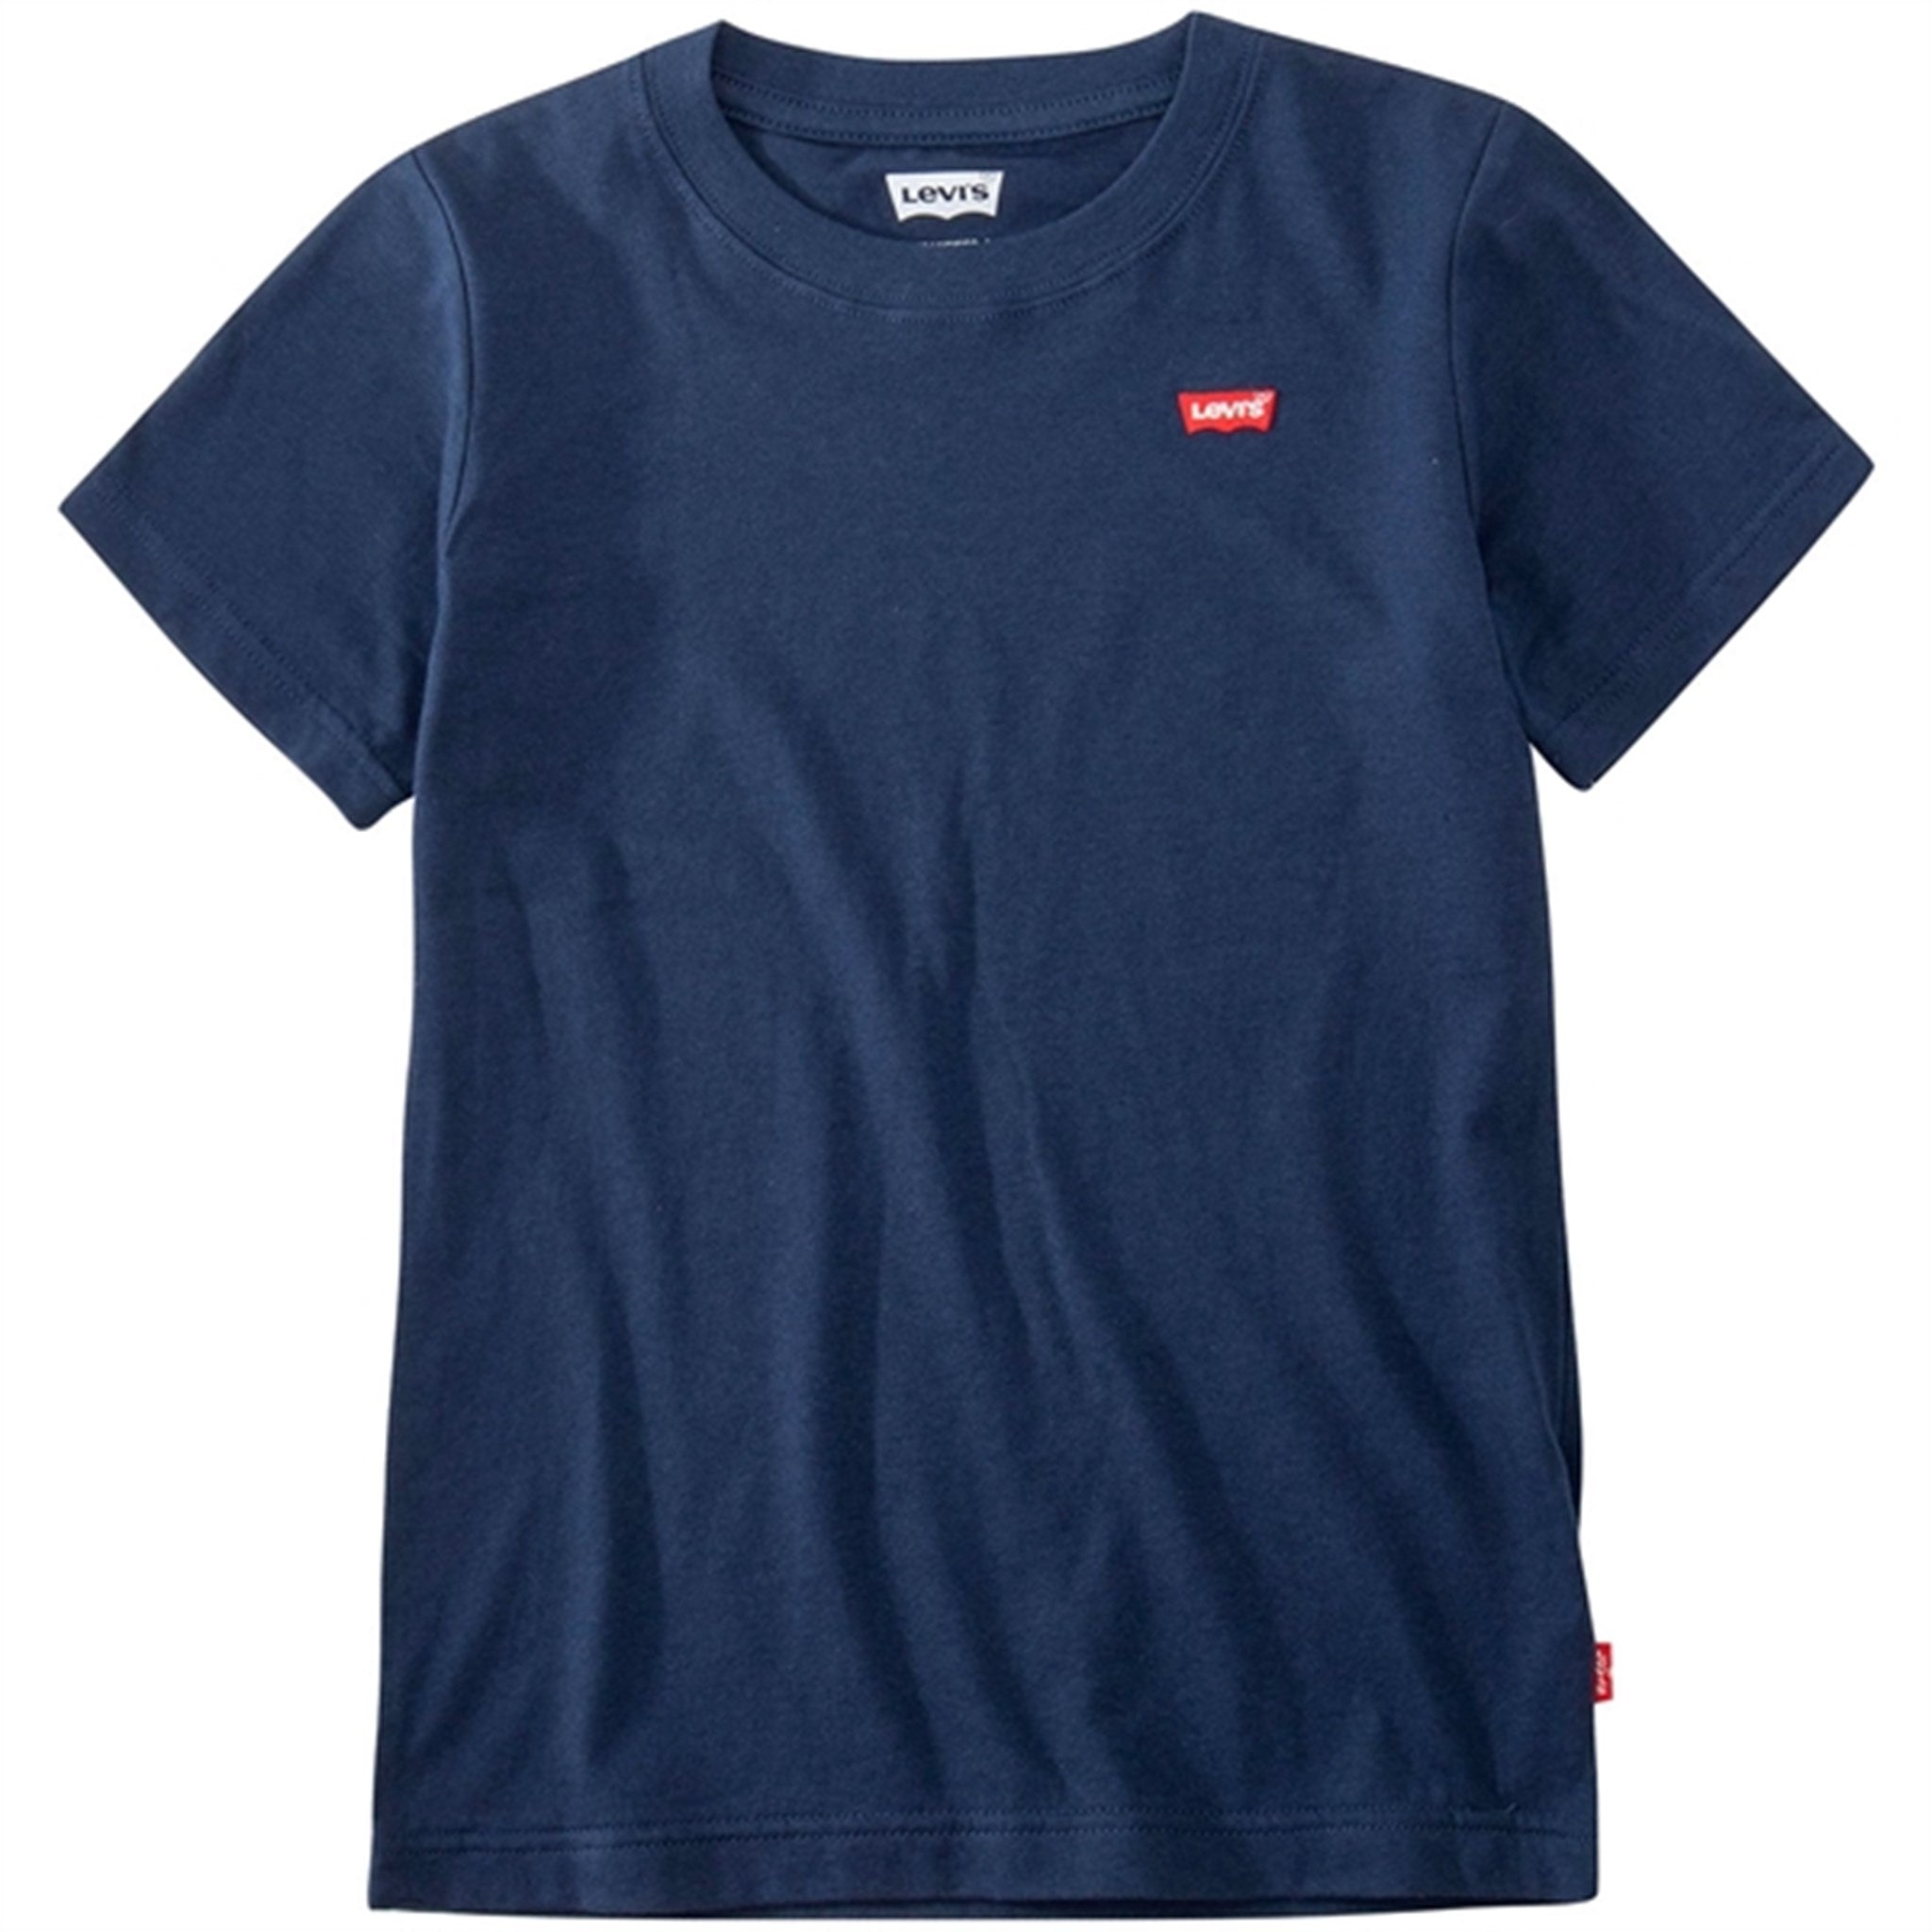 Levis Tee SS Batwing Chest Hit Dress Blues